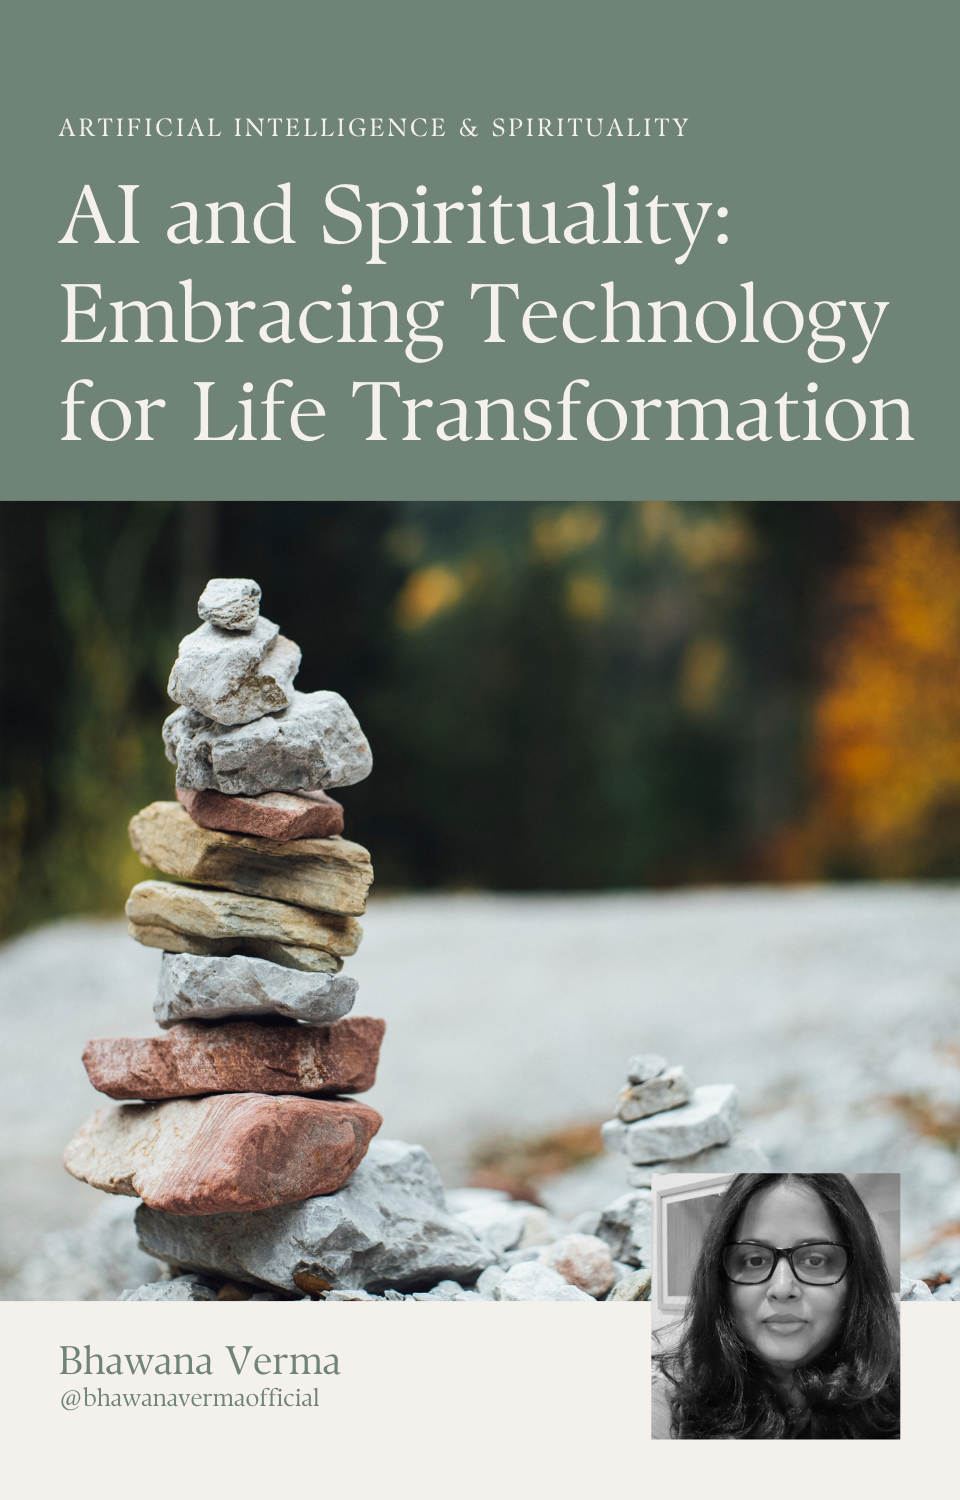 eBook AI and Spirituality: Embracing Technology for Life Transformation, INSTANT DOWNLOAD, PDF File